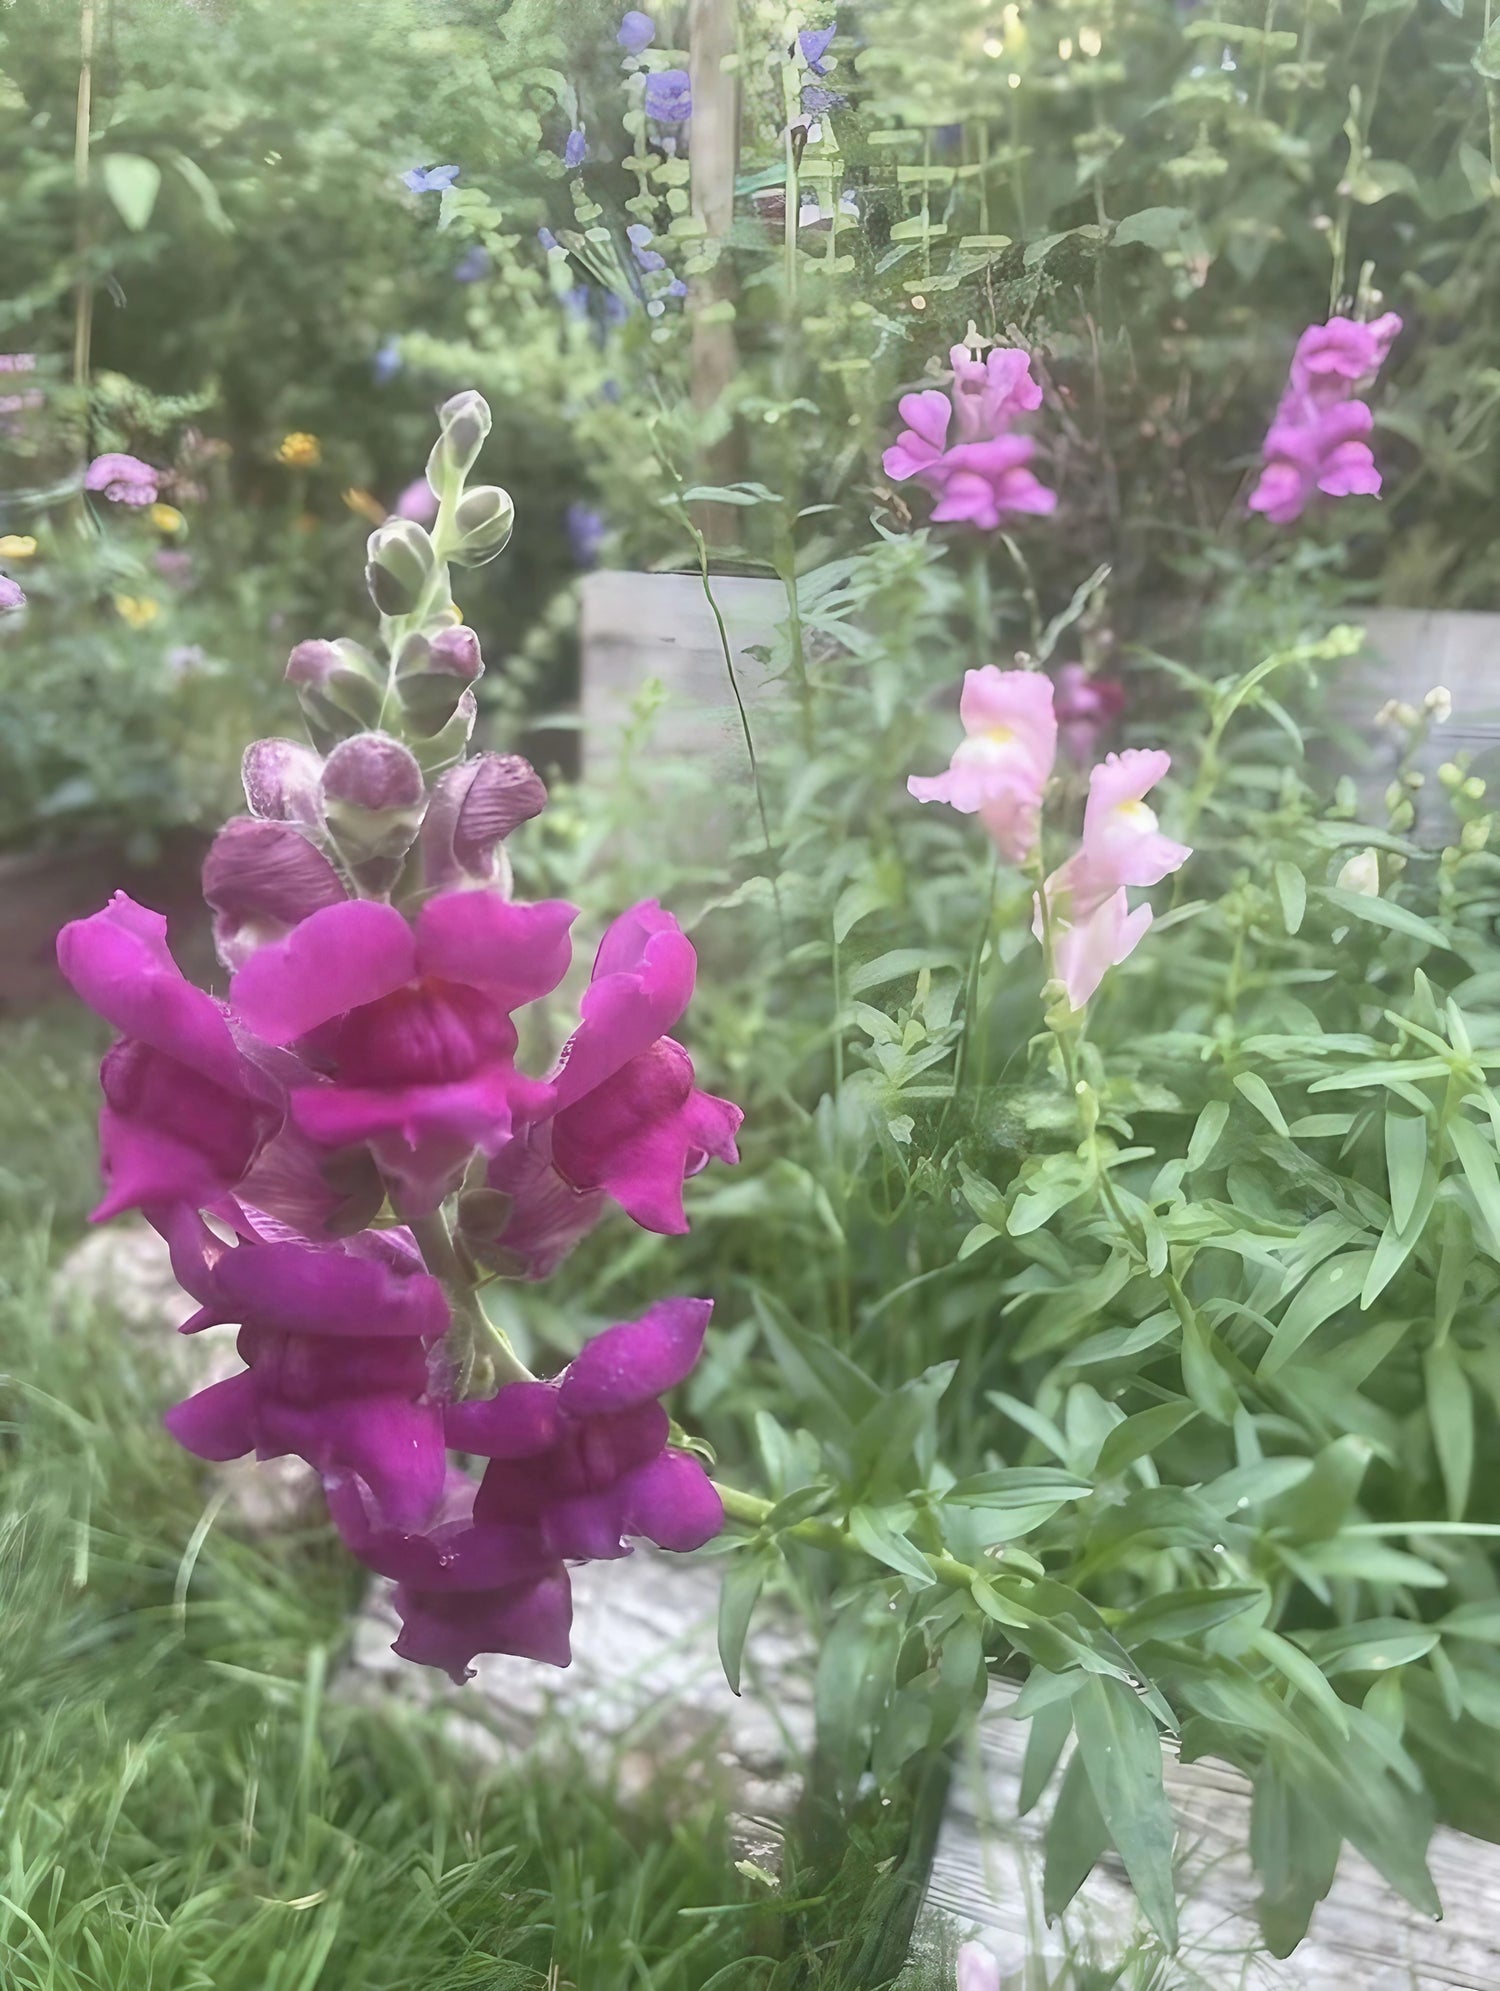 Lush Antirrhinum Crown Mixed with purple flowers set against green leaves